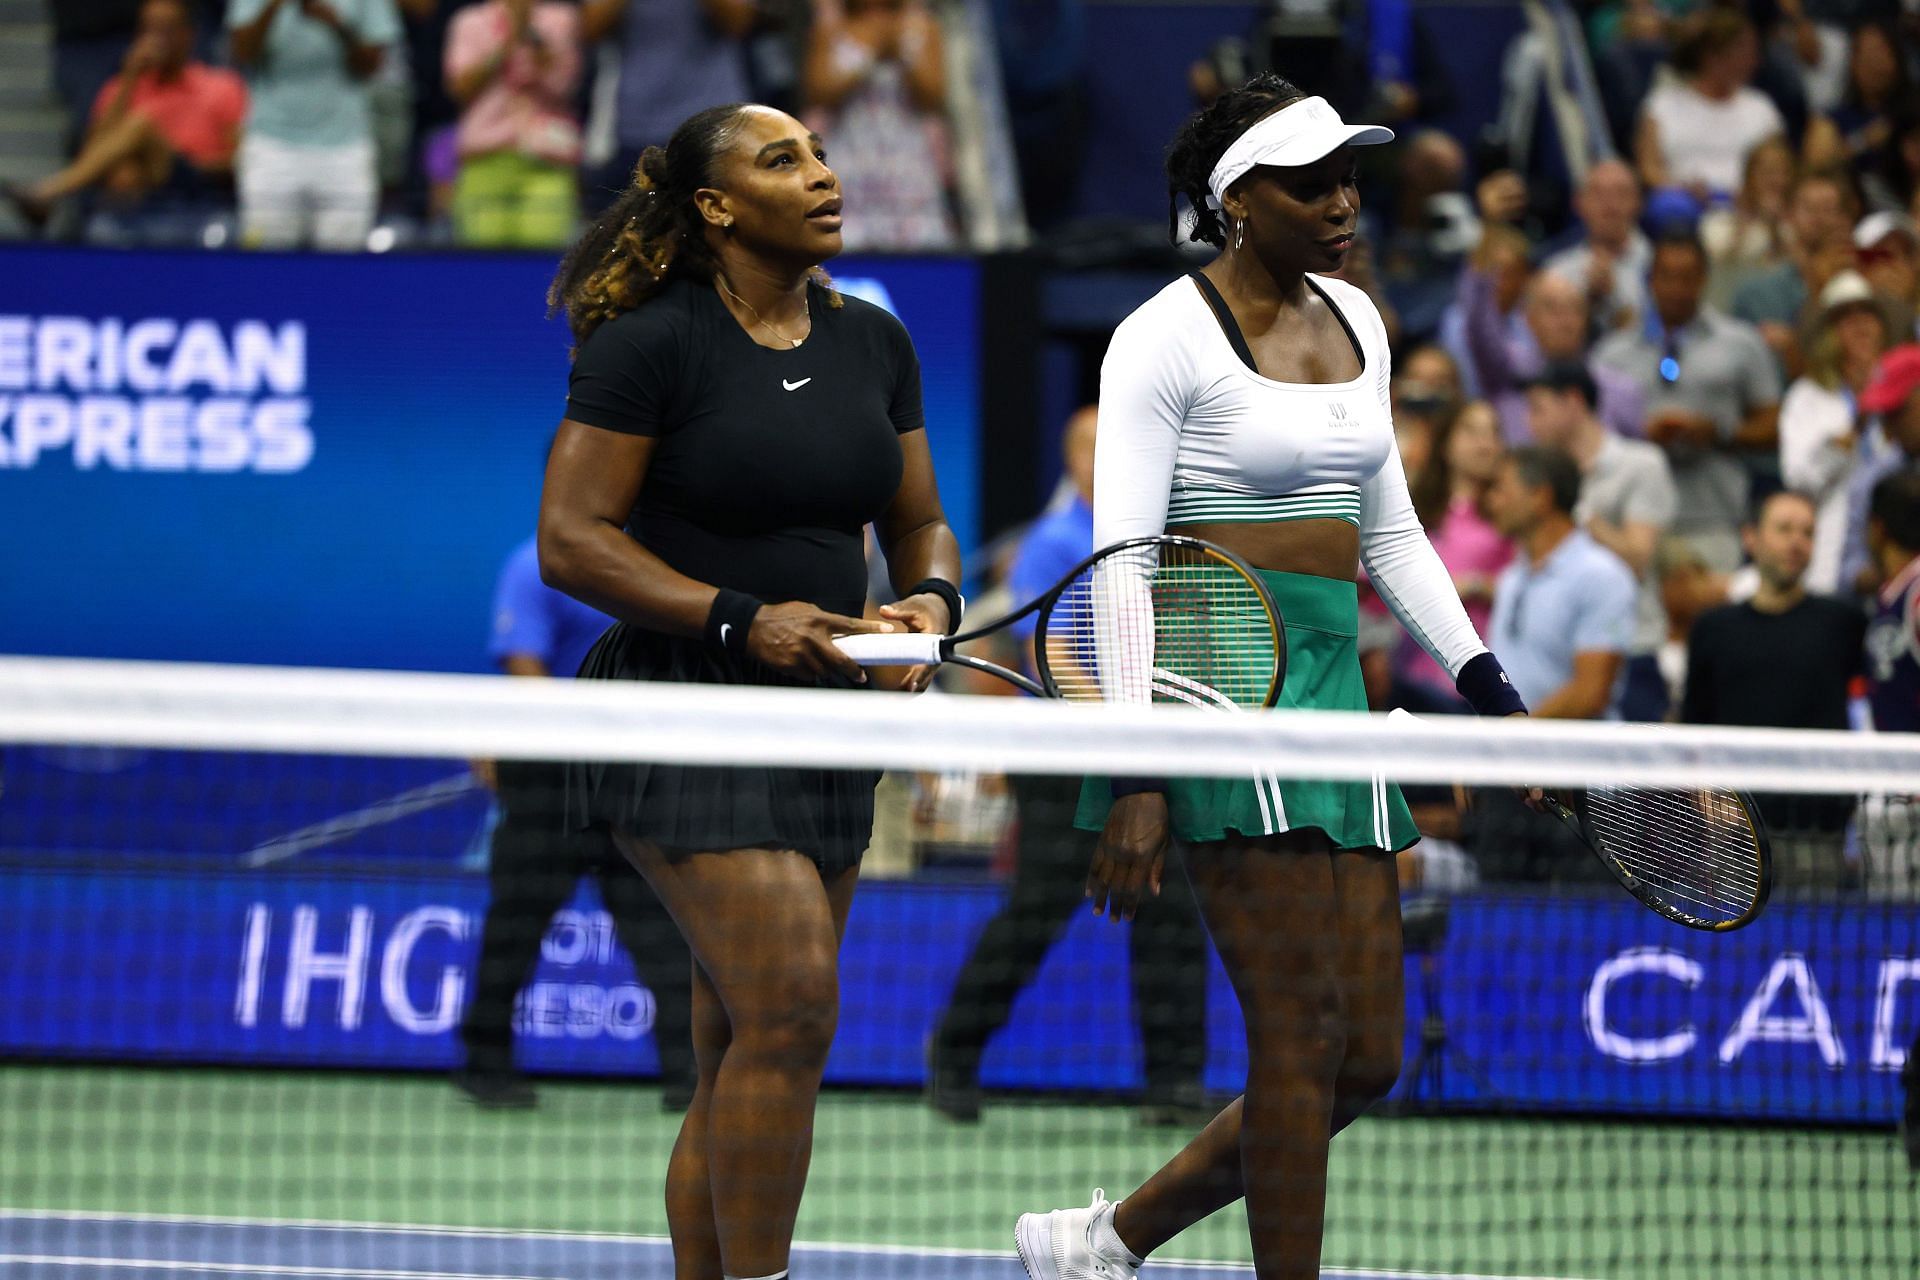 Serena and Venus at 2022 US Open. Photo by Elsa/Getty Images